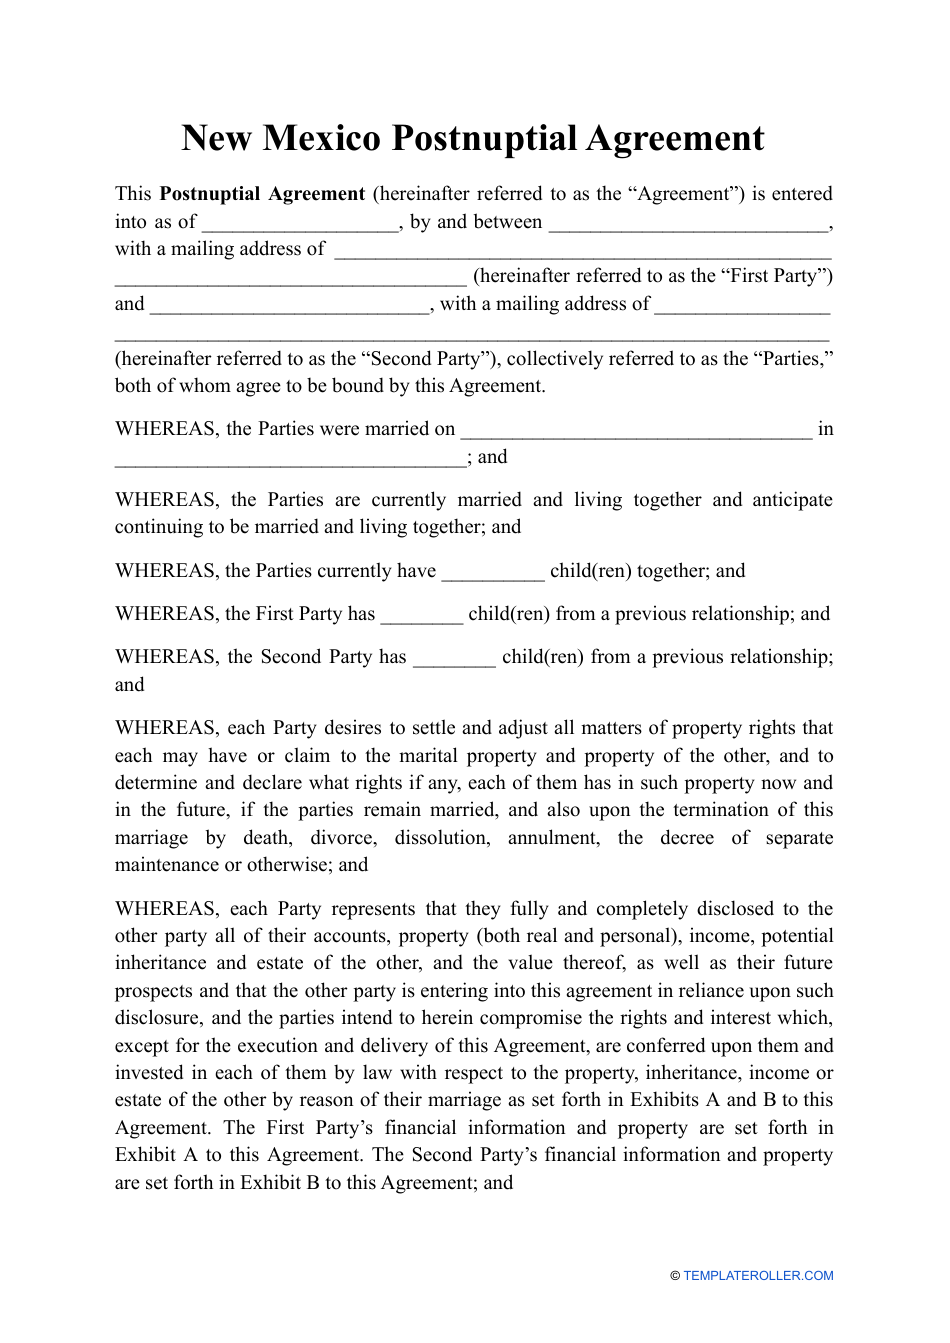 Postnuptial Agreement Template - New Mexico, Page 1